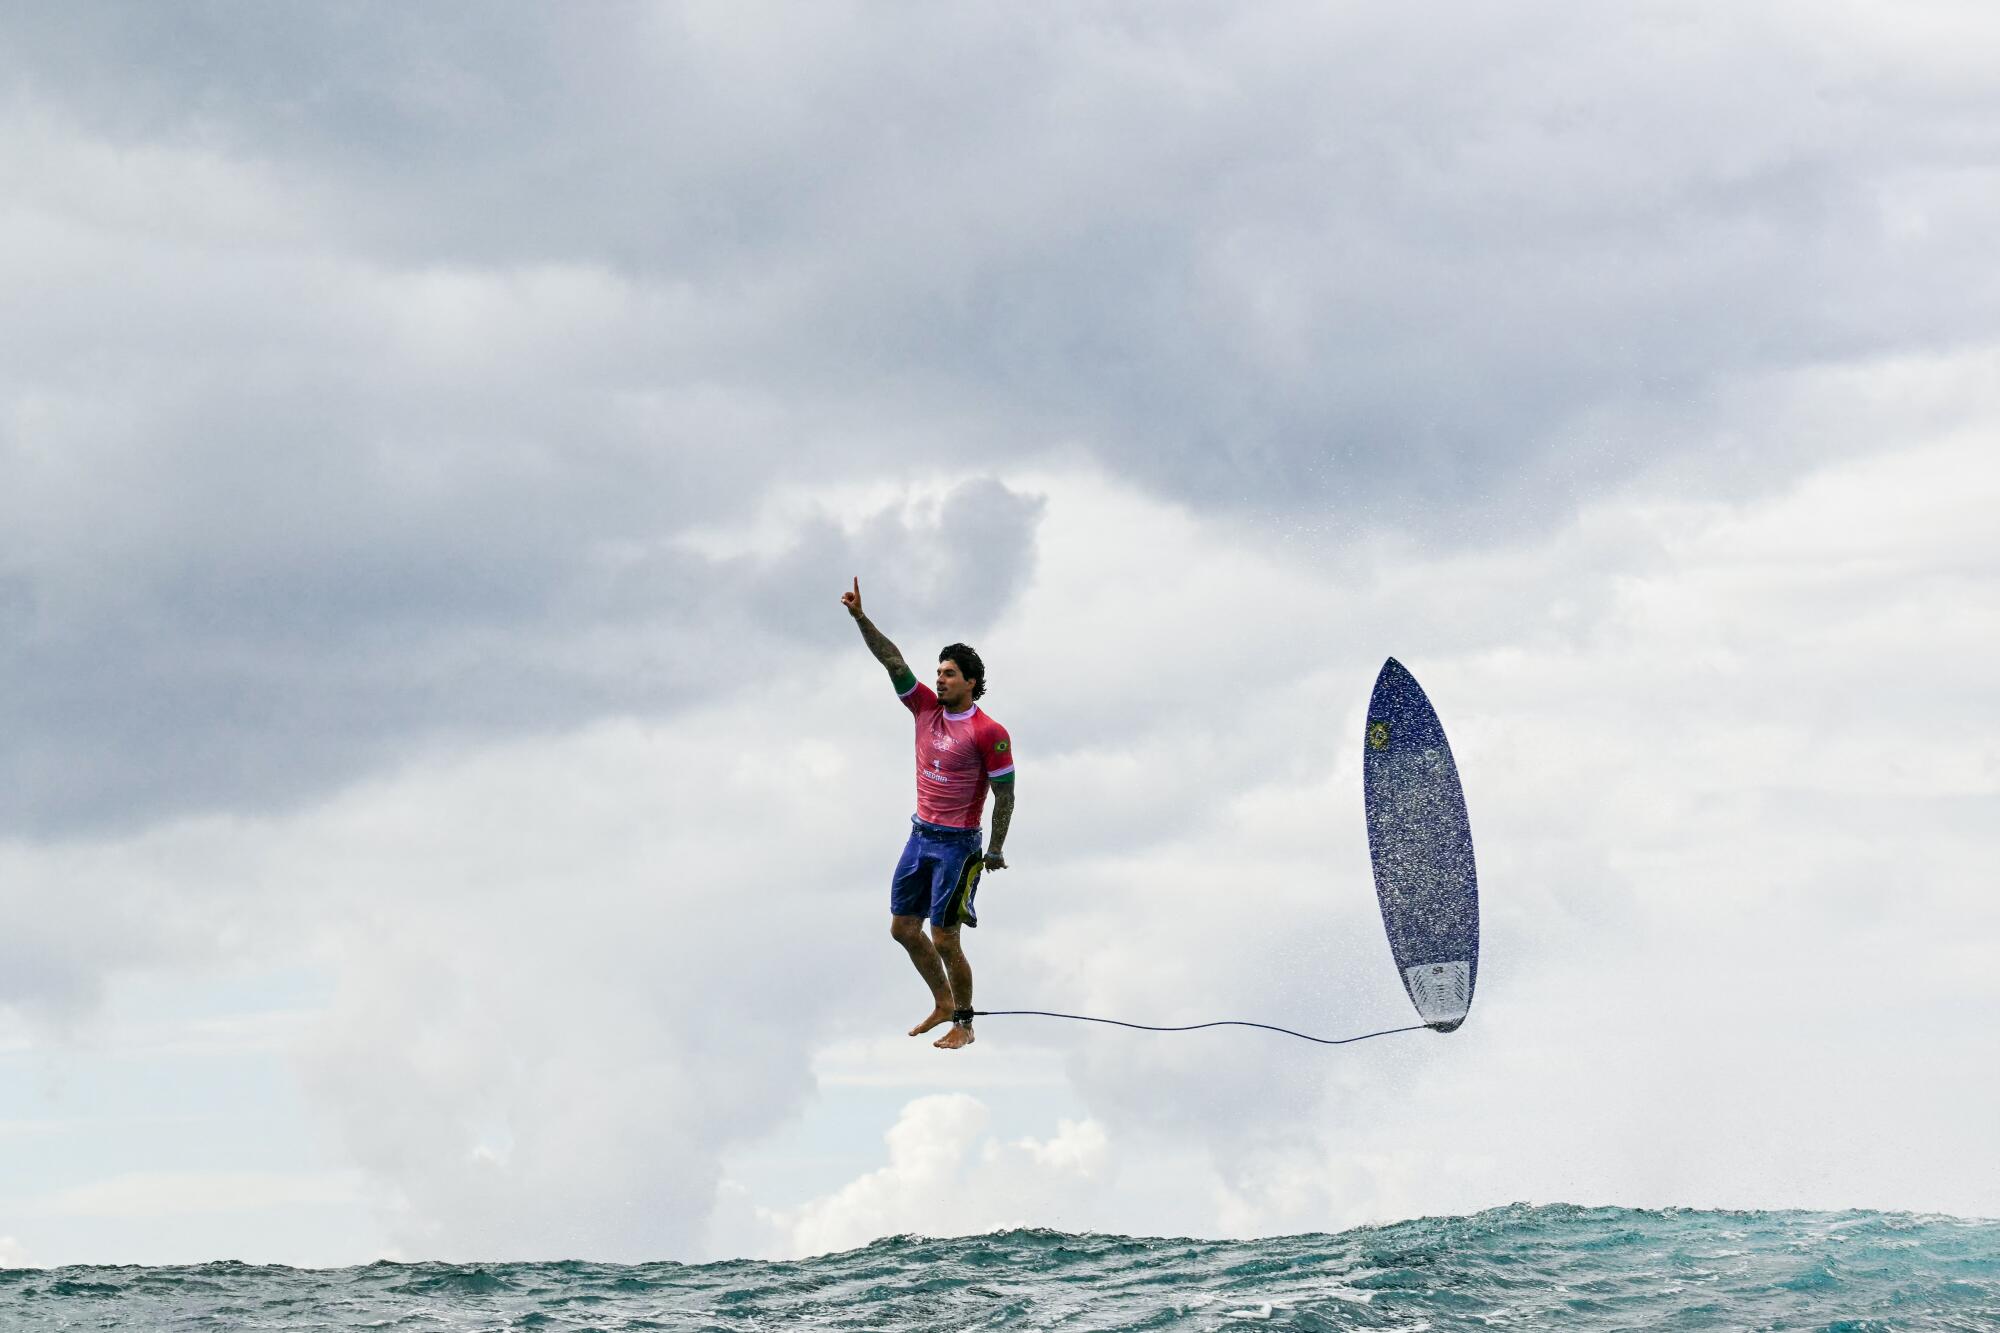 Brazil's Gabriel Medina holds up one finger while in midair, upright and parallel to his surfboard, over the ocean